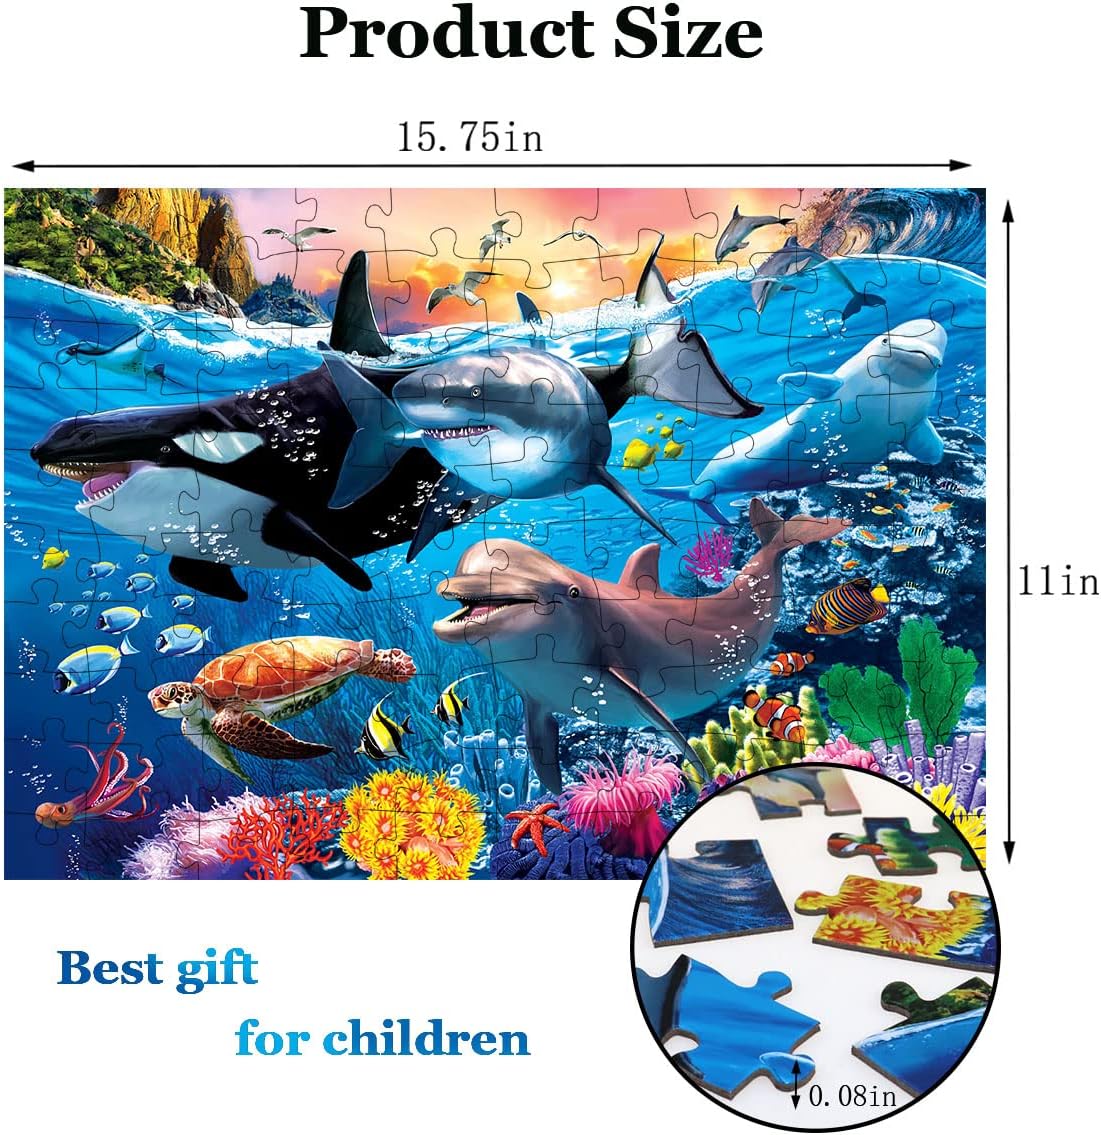 Puzzles for Kids Ages 4-8 Year Old - Underwater World,100 Piece Jigsaw Puzzle for Toddler Children Learning Educational Puzzles Toys for Boys and Girls.